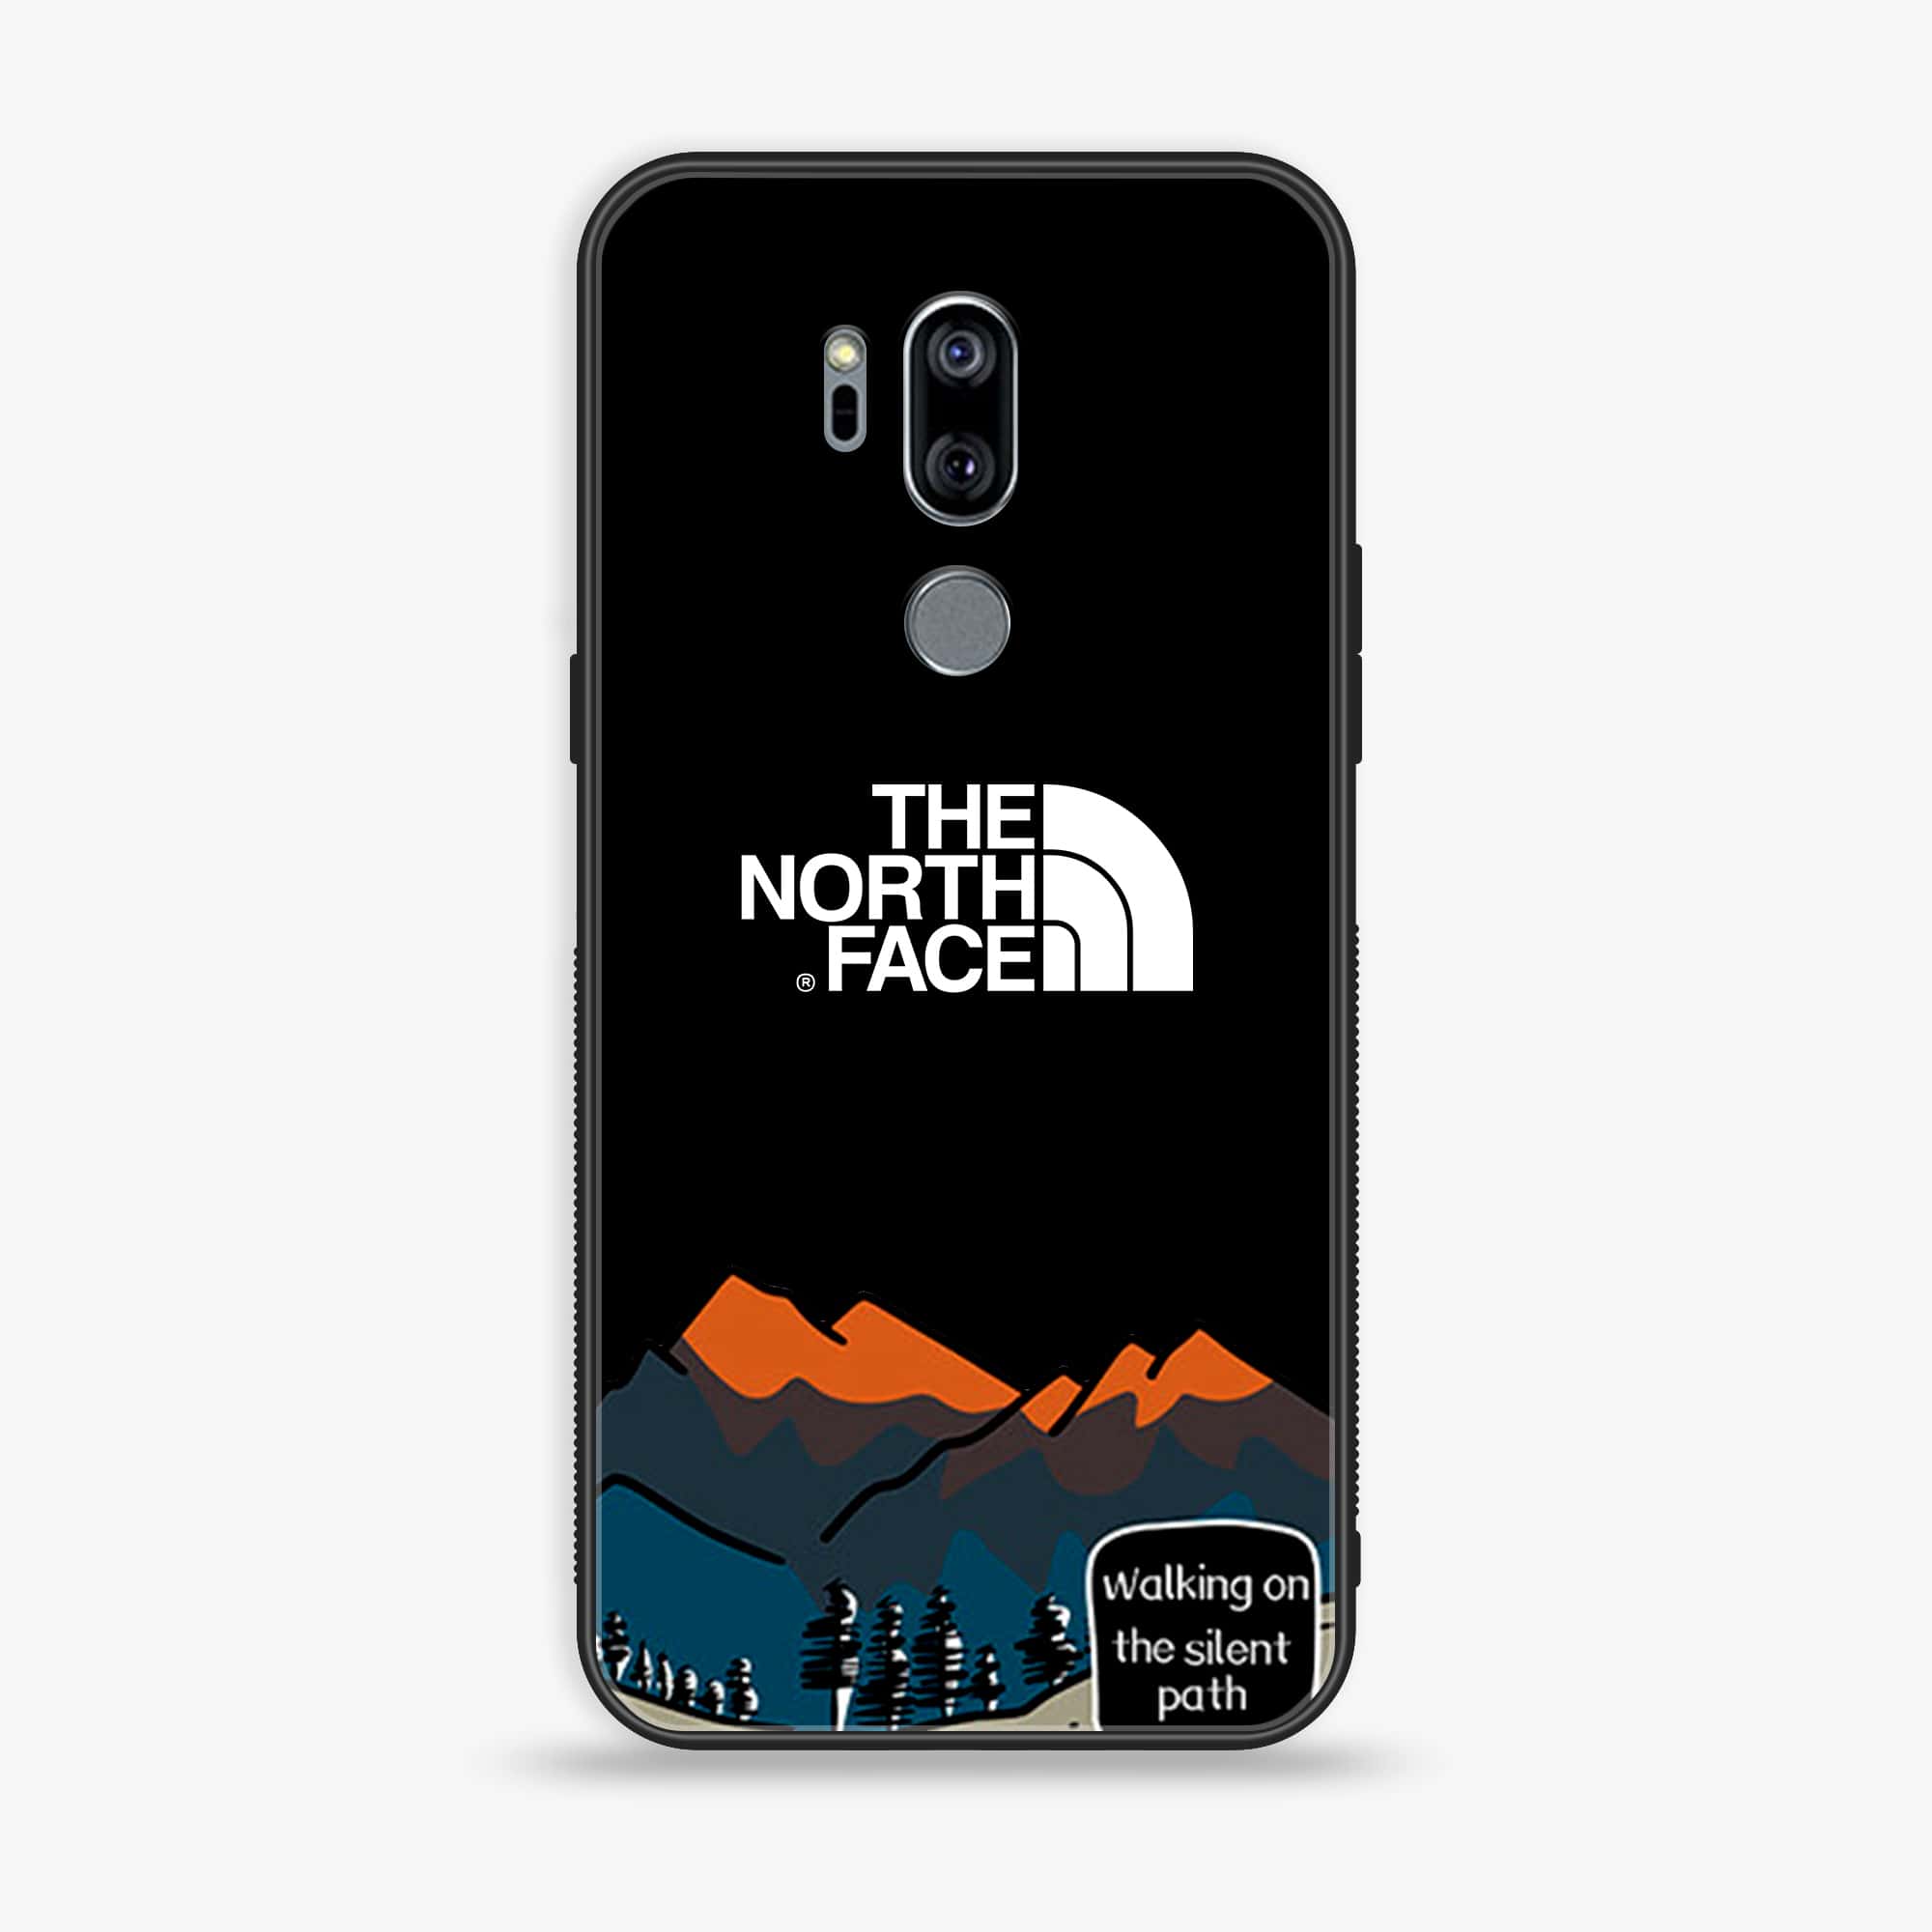 LG G7 ThinQ - The North Face Series - Premium Printed Glass soft Bumper shock Proof Case